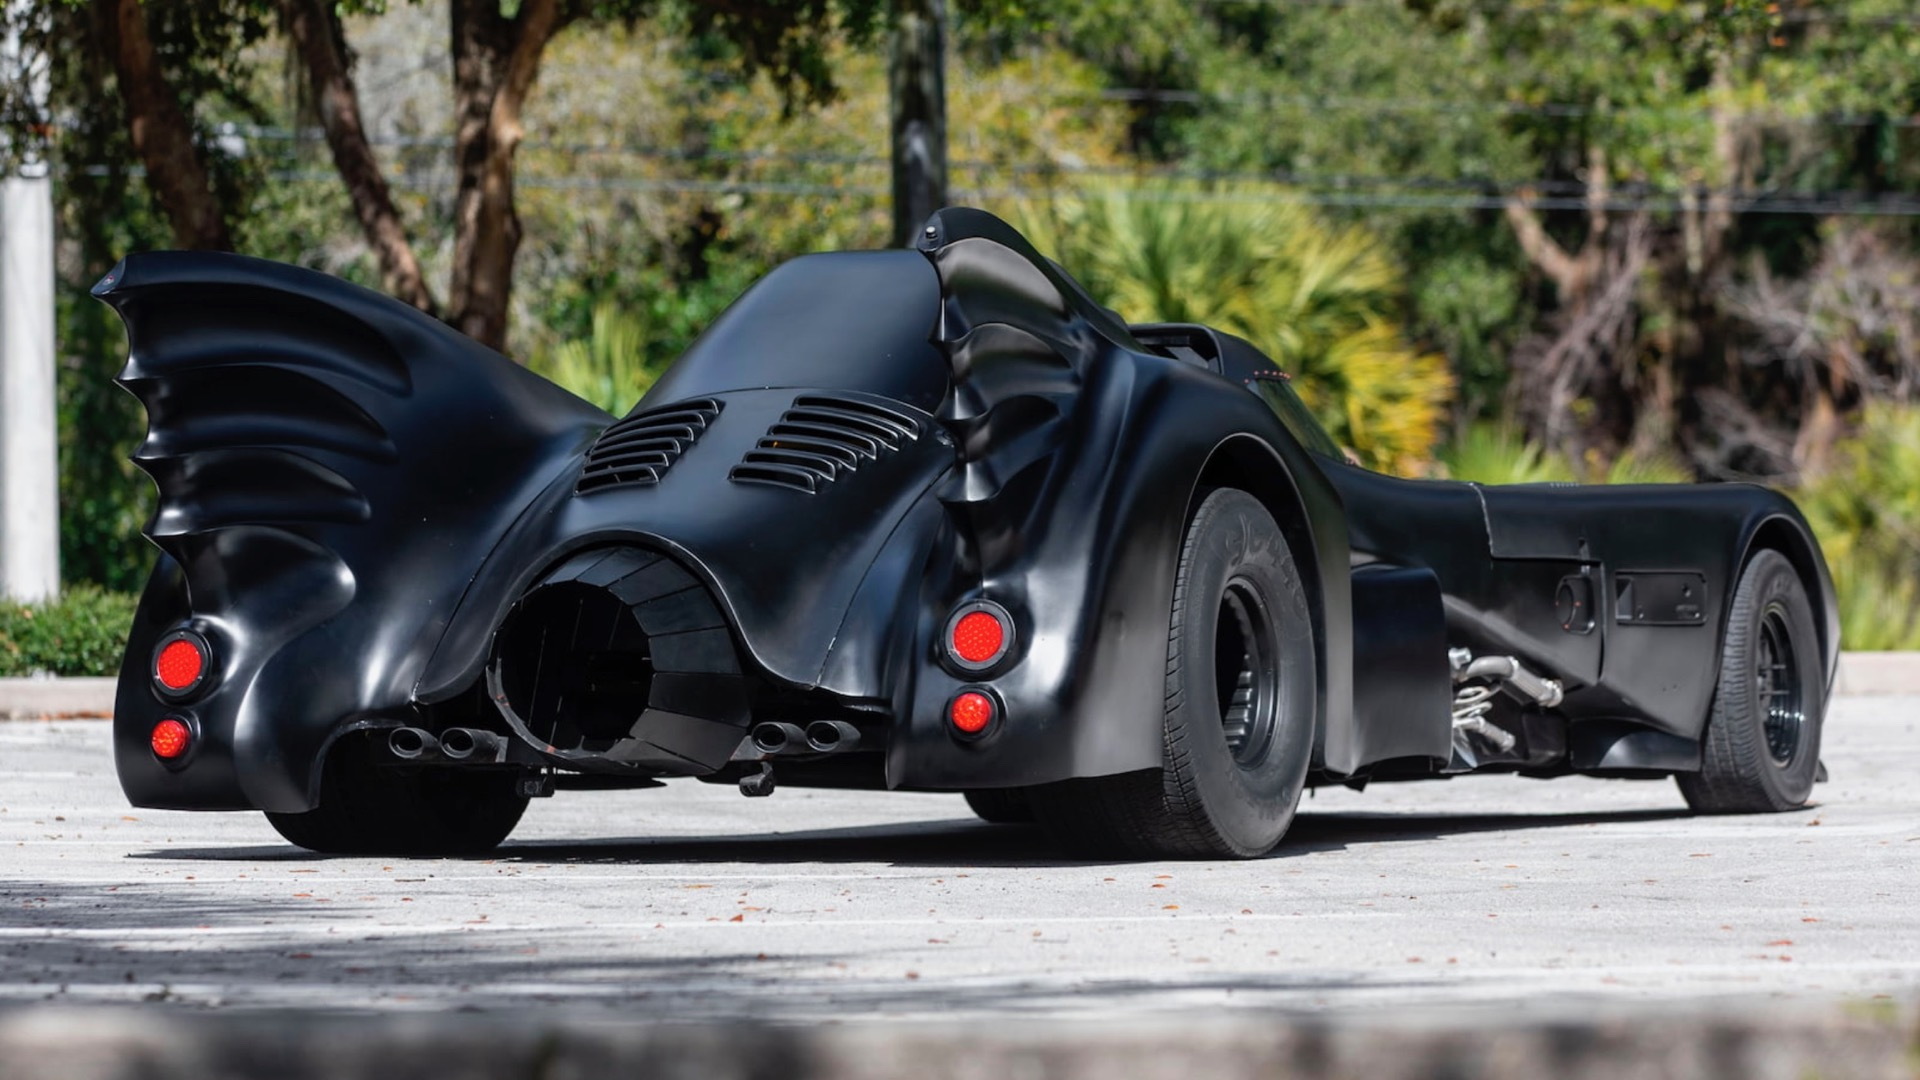 This New Fully Functional Electric Batmobile Replica Could Be